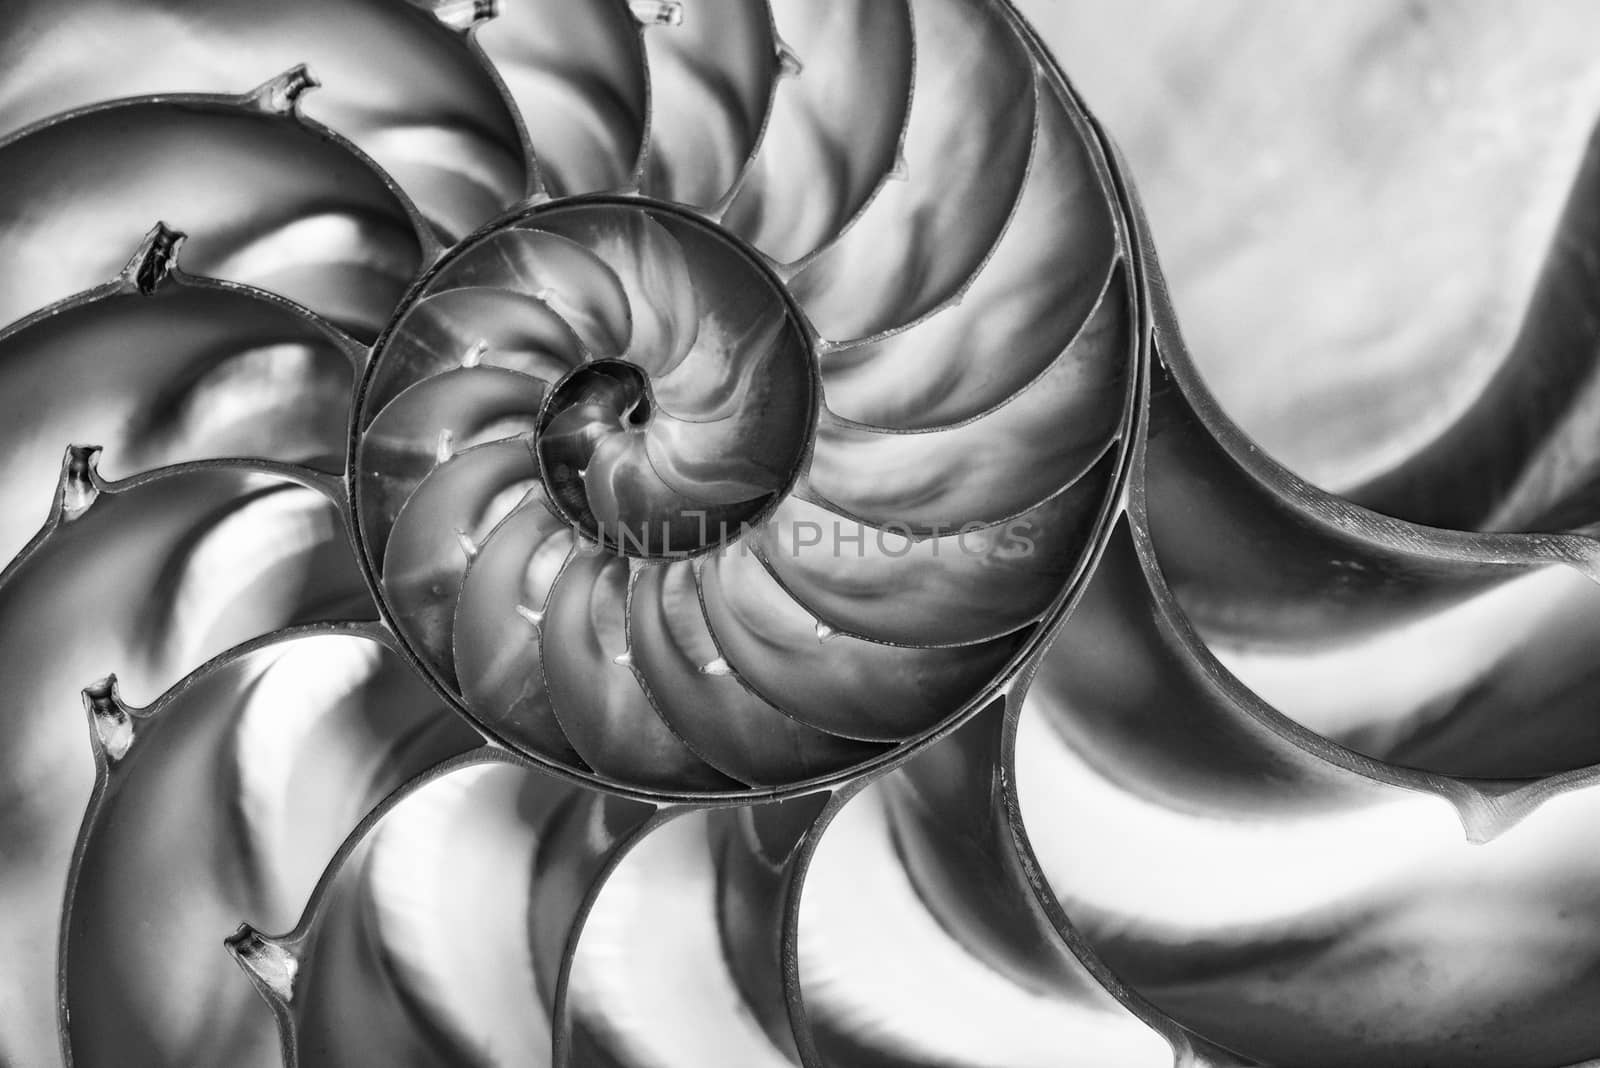 Detailed contrasty photo of a halved backlit  shell of a chambered nautilus (Nautilus pompilius) shows beautiful spiral pattern. Black and white